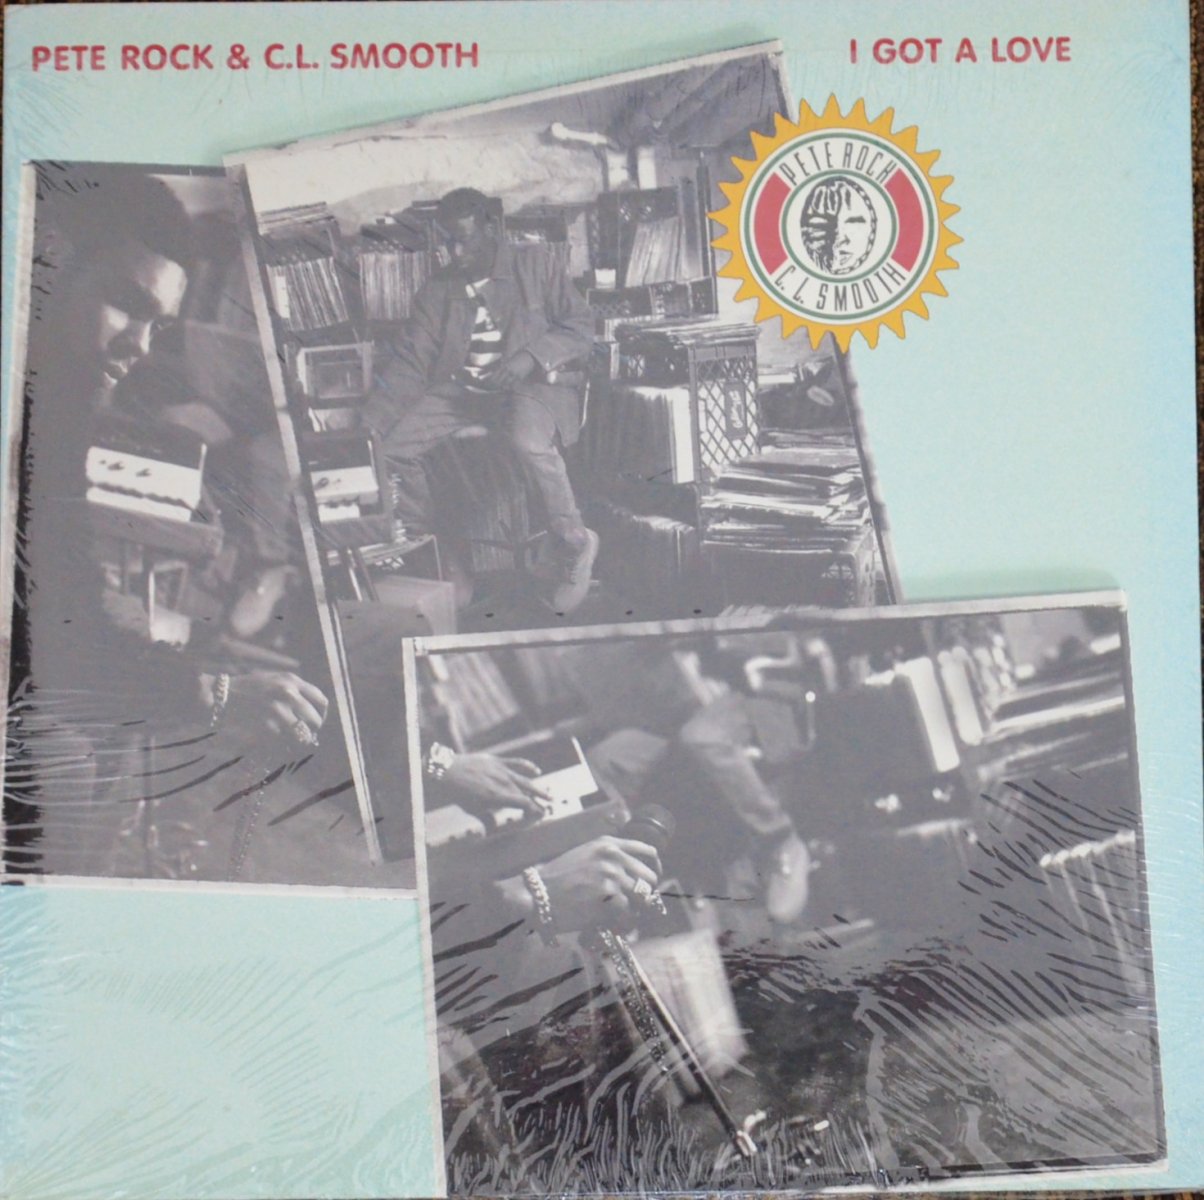 PETE ROCK & C.L. SMOOTH ‎/ I GOT A LOVE / THE MAIN INGREDIENT (12 